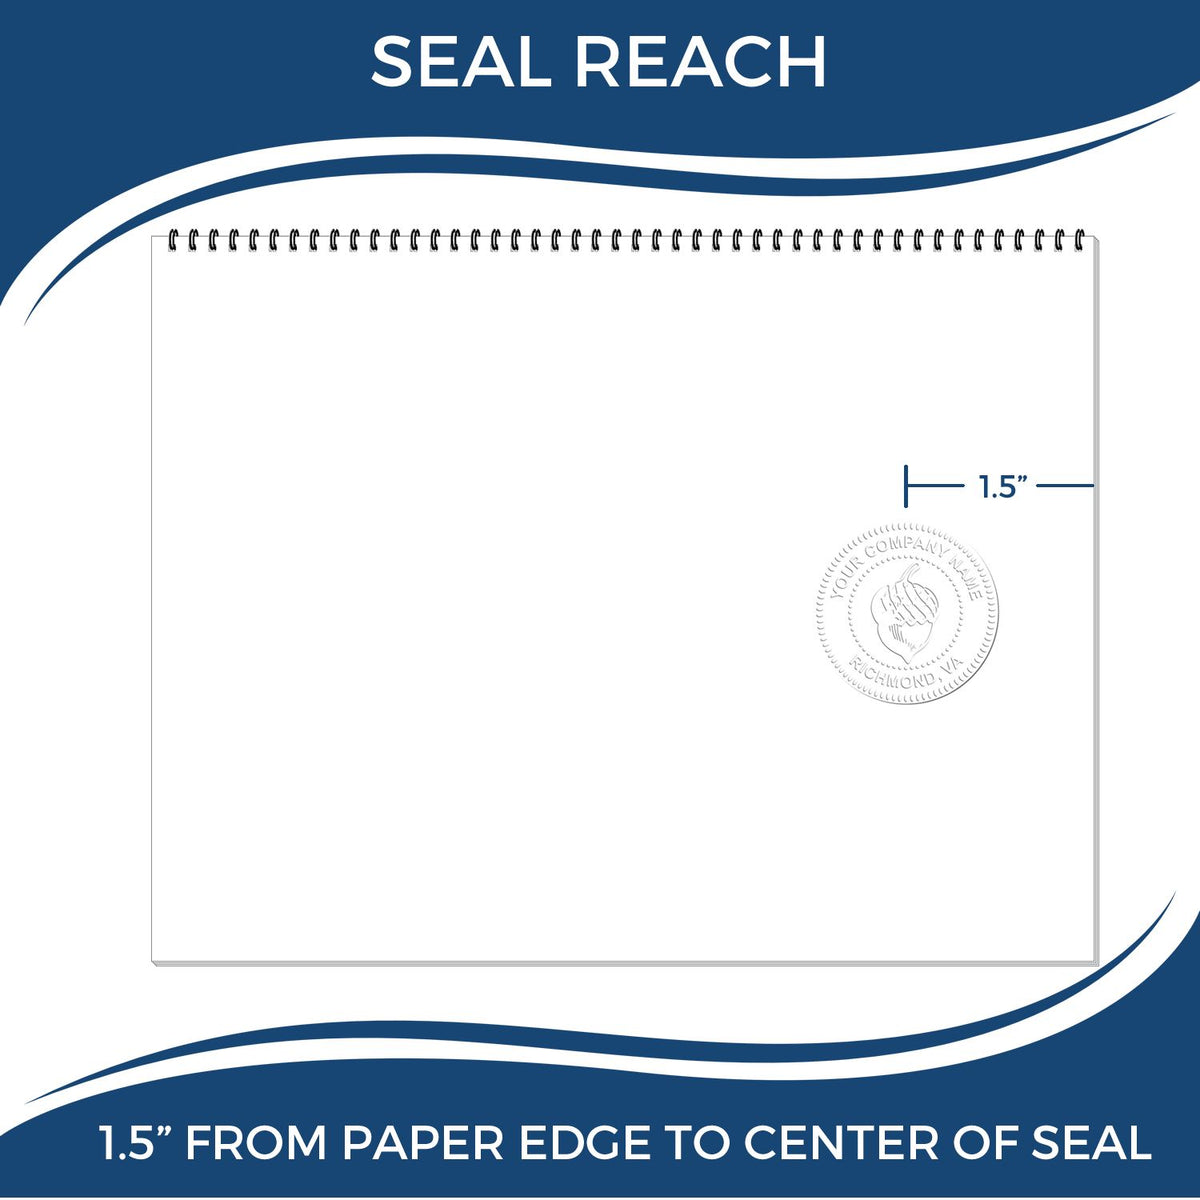 An infographic showing the seal reach which is represented by a ruler and a miniature seal image of the Soft Arkansas Professional Geologist Seal